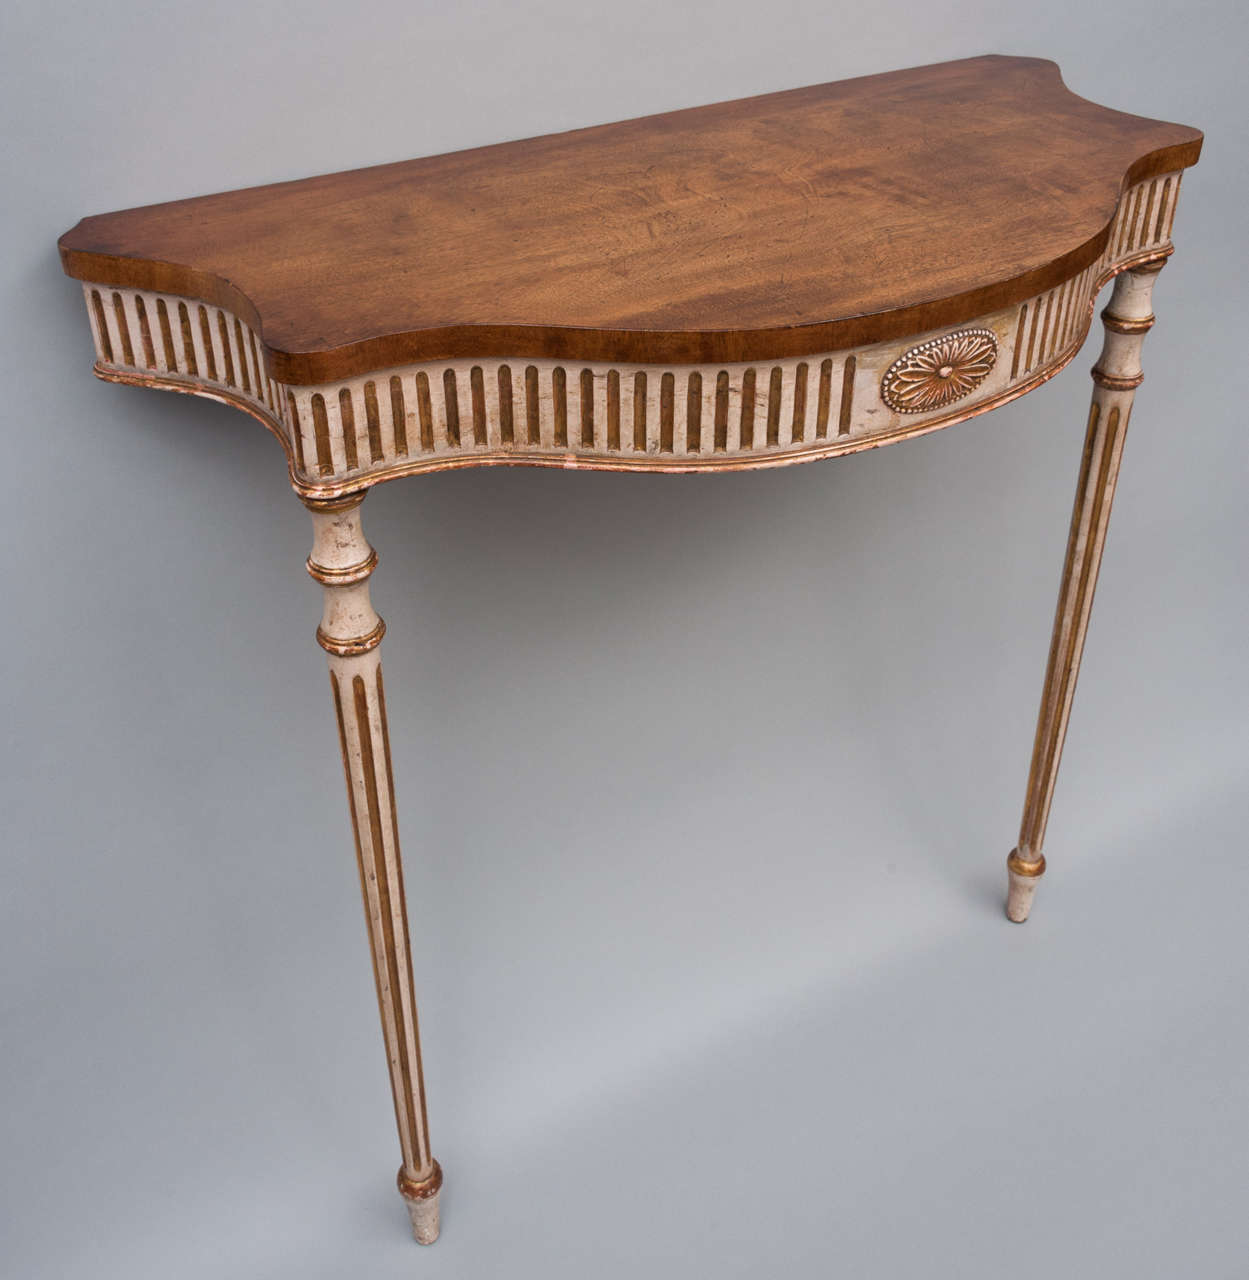 Geo III pair of neo classical pier tables of elegant proportions; with serpentine, figured mahogany tops; above a cream and parcel gilt decorated freize with flutes and carved central paterae raised on fluted slender turned legs.